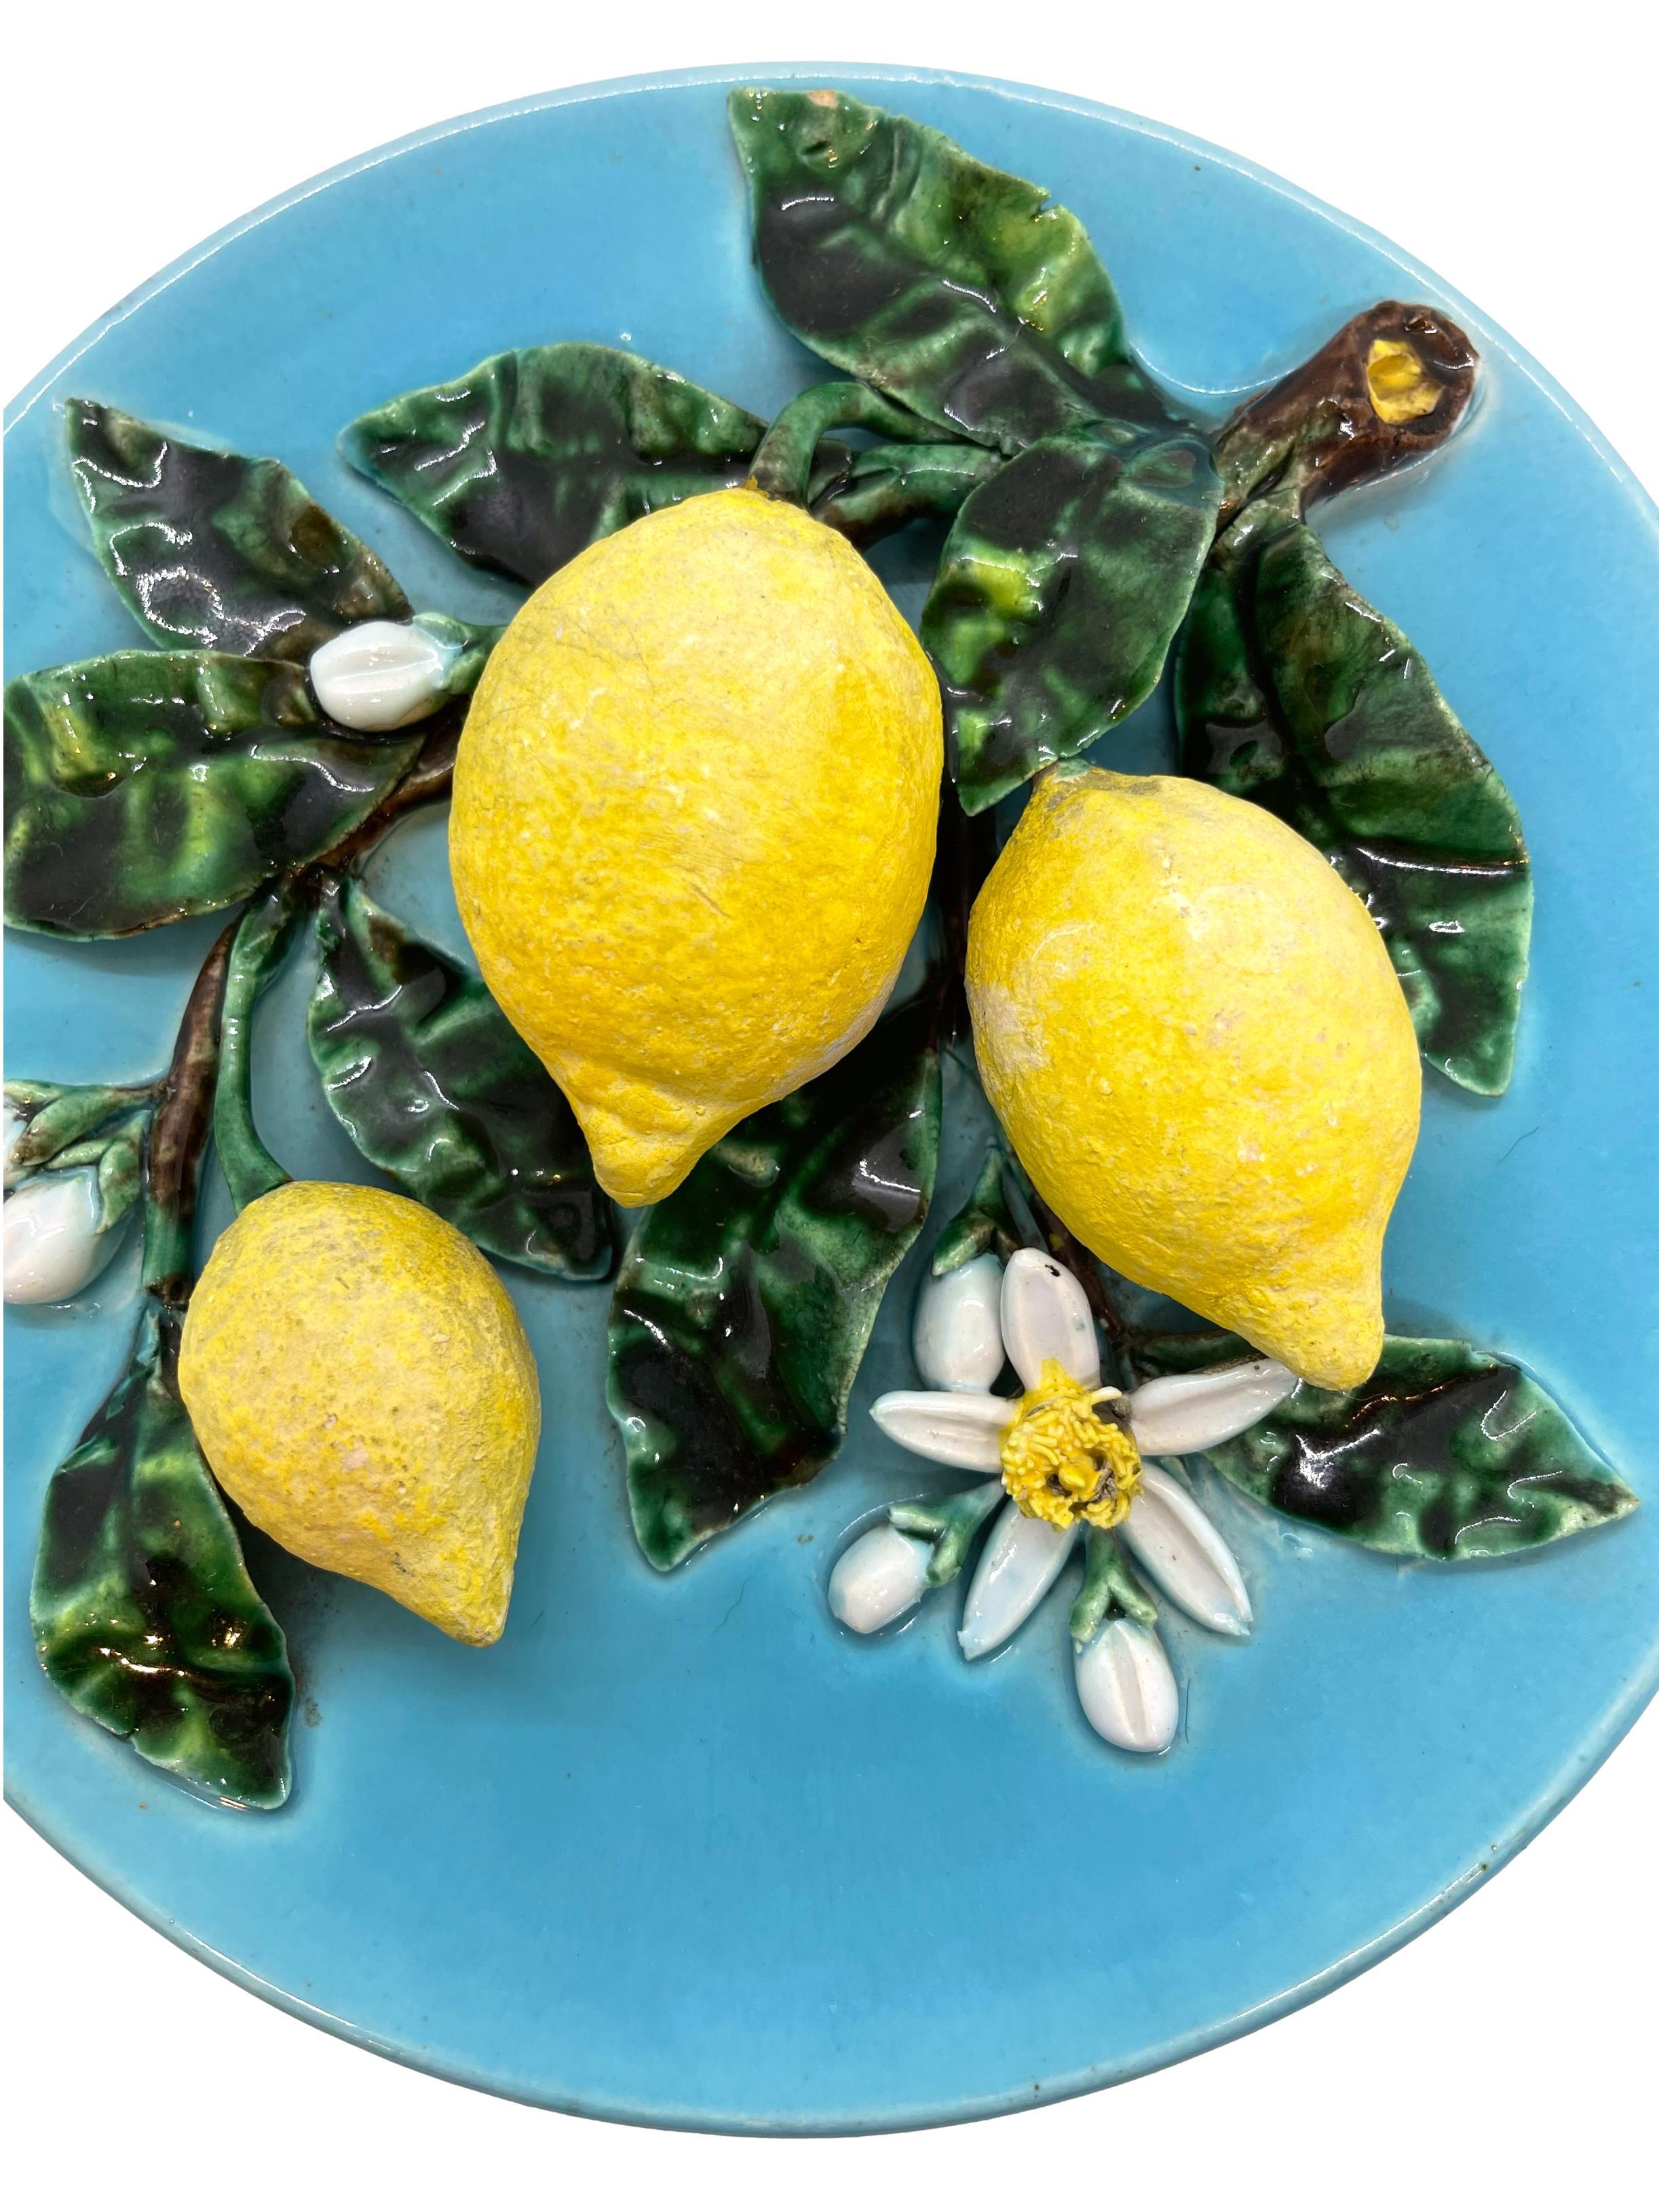 Molded French Majolica Trompe L'oeil Wall Plaque with Lemons, Perret-Gentil, Menton